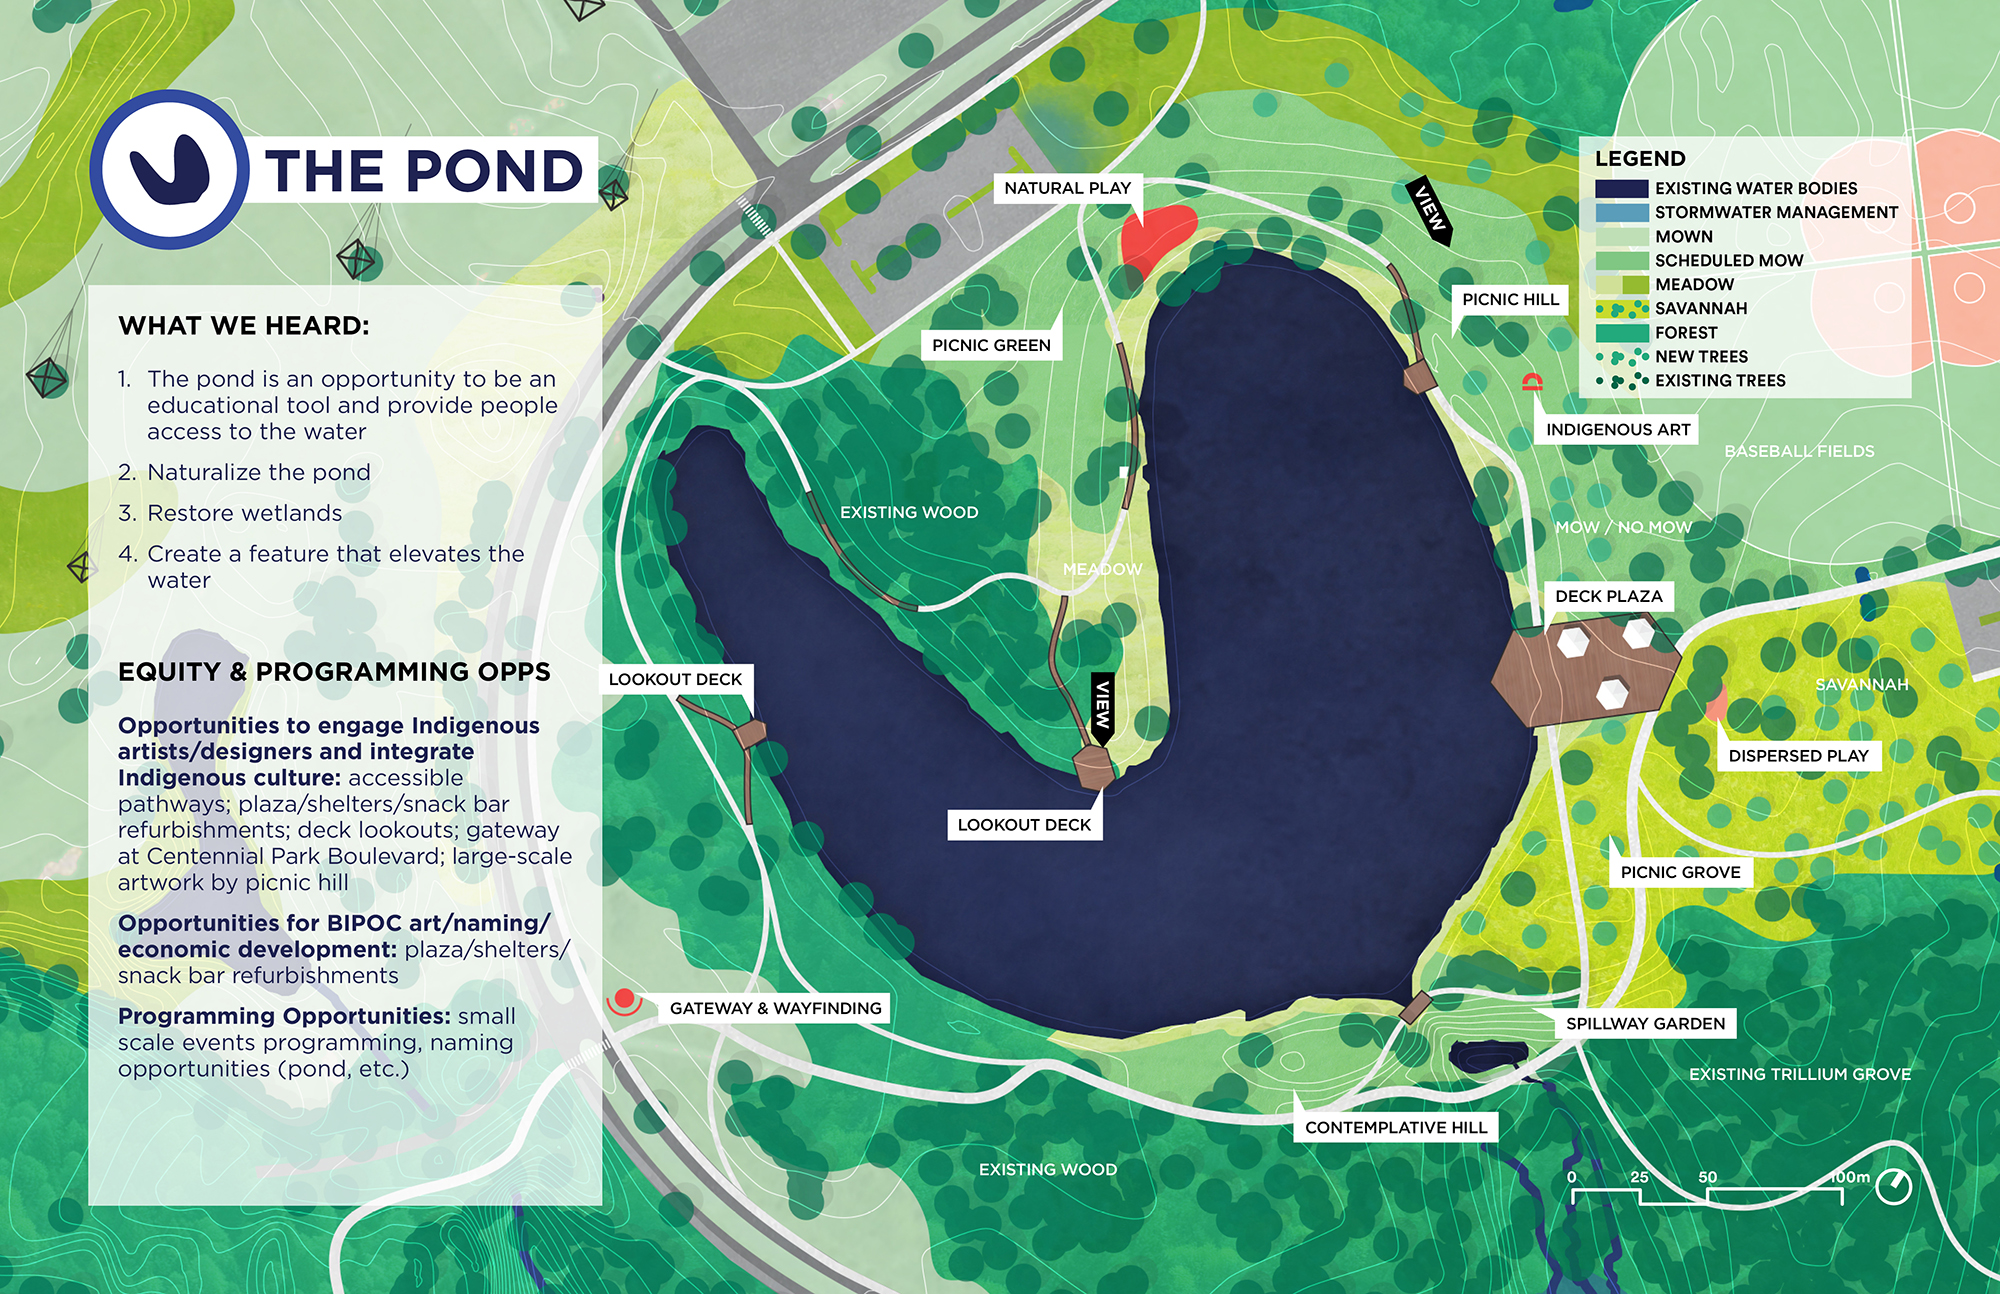 This plan image demonstrates what the design for the pond area could look like. Features include three lookout decks, a gateway and wayfinding linking to the Etobicoke Creek traill, picnic groves and hills, a plaza with refurbished structures, Indigenous art, a natural play area, and meadow, savannah and forest planting areas.